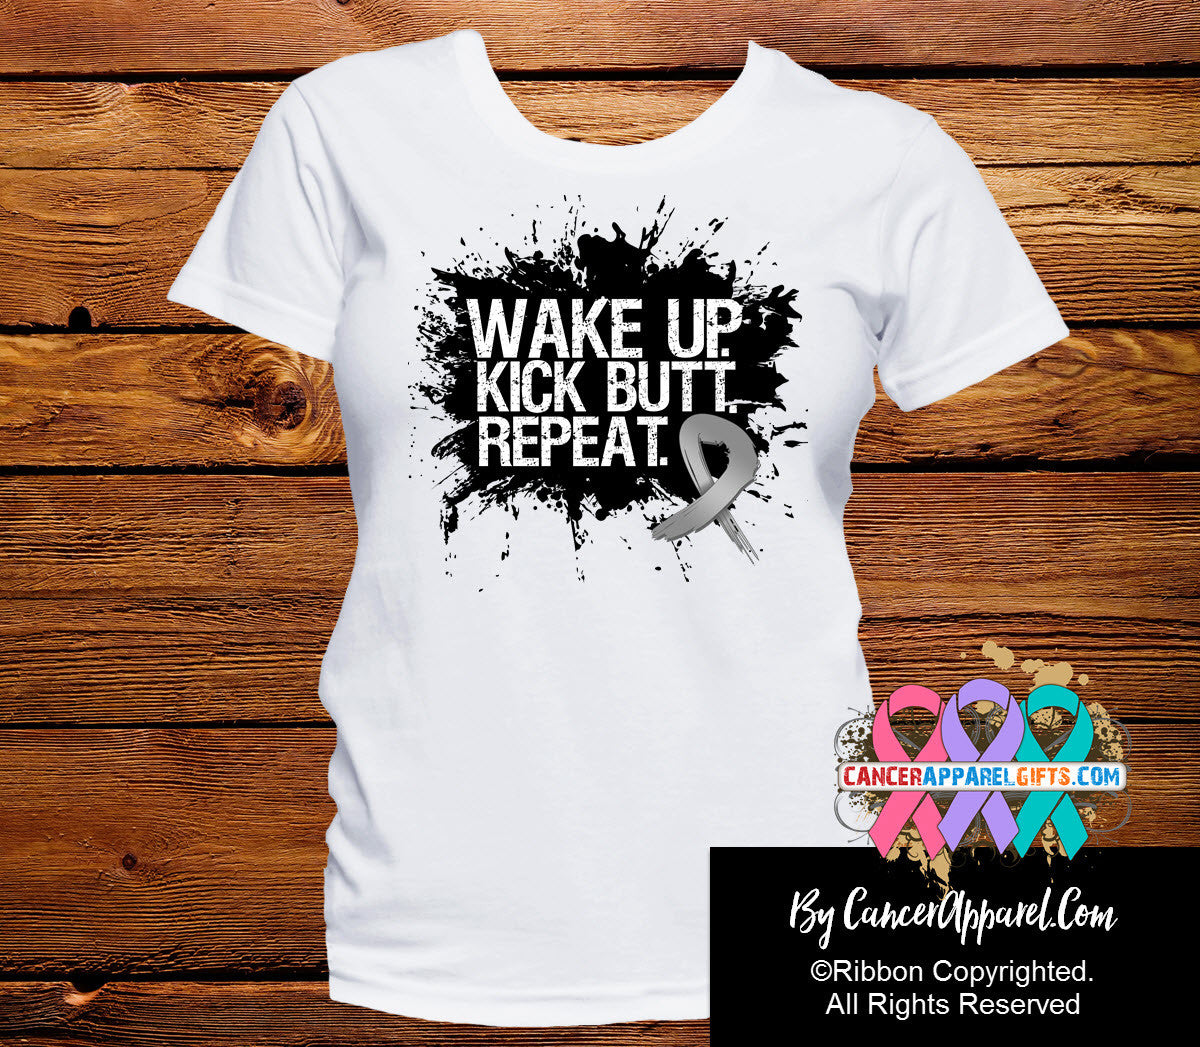 Brain Cancer Shirts Wake Up Kick Butt and Repeat - Cancer Apparel and Gifts